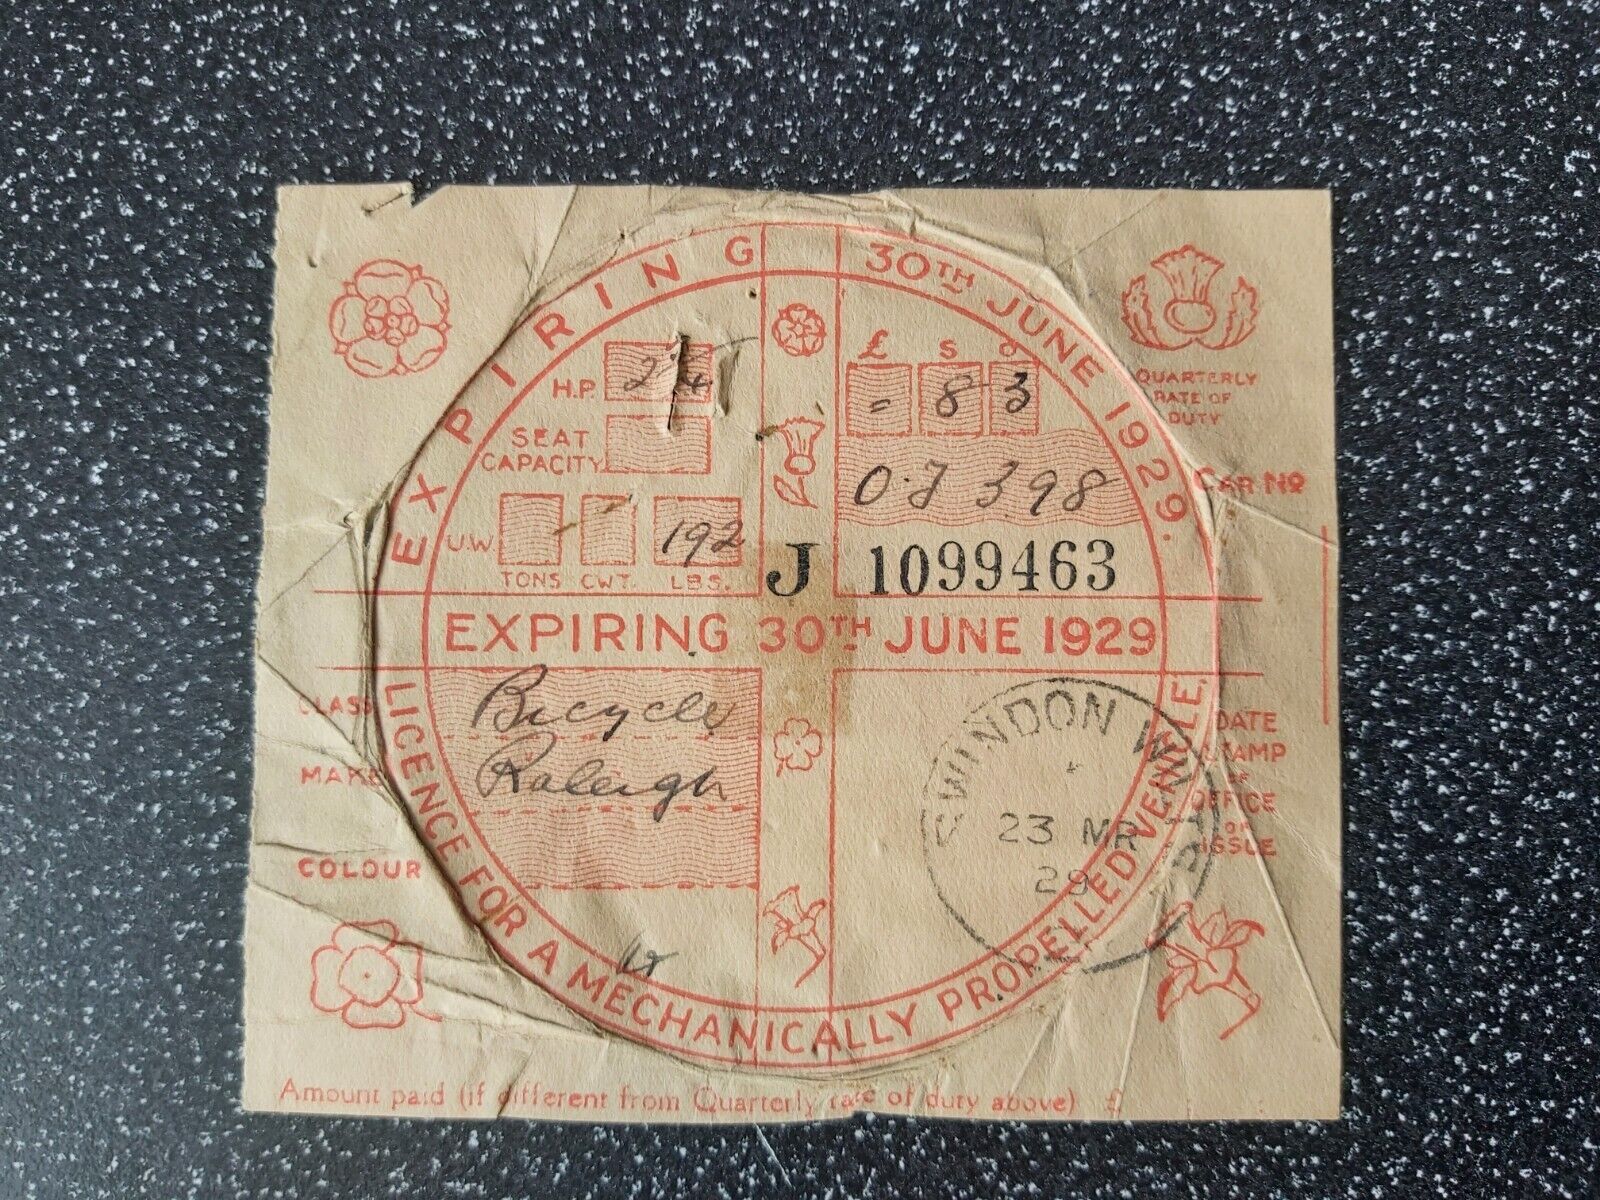 1929 Road Tax Disc ☆ Raleigh M/Cycle ☆ Selvedge ☆ OJ 398 ☆ Scarce & Collectable